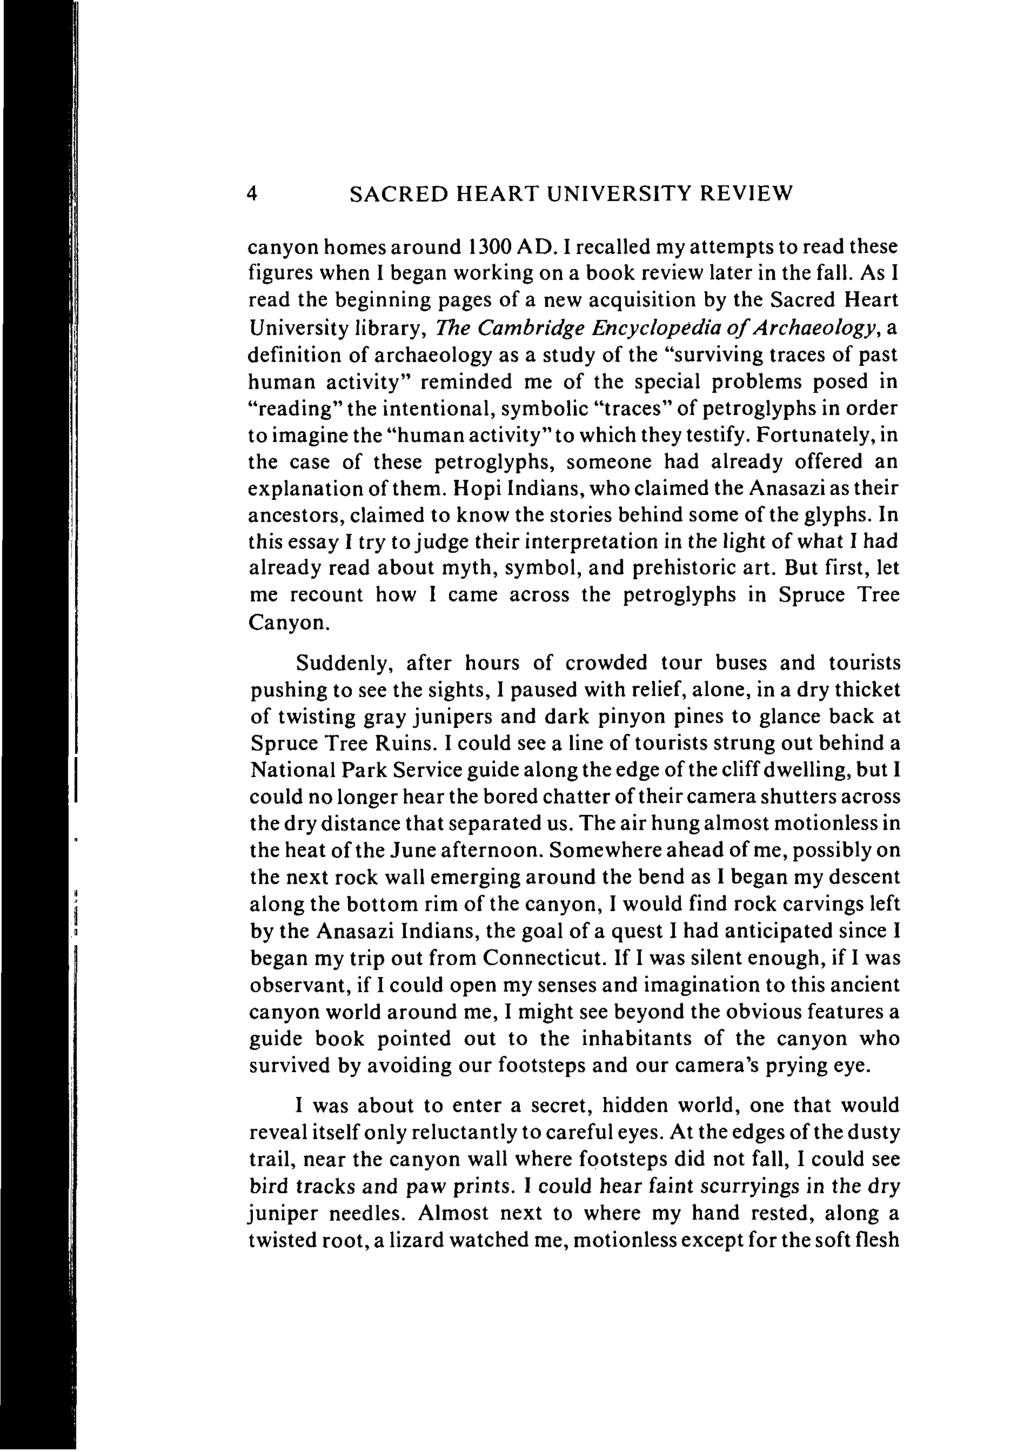 Sacred Heart University Review, Vol. 1, Iss. 1 [1980], Art. 1 SACRED HEART UNIVERSITY REVIEW canyon homes around 1300 AD.